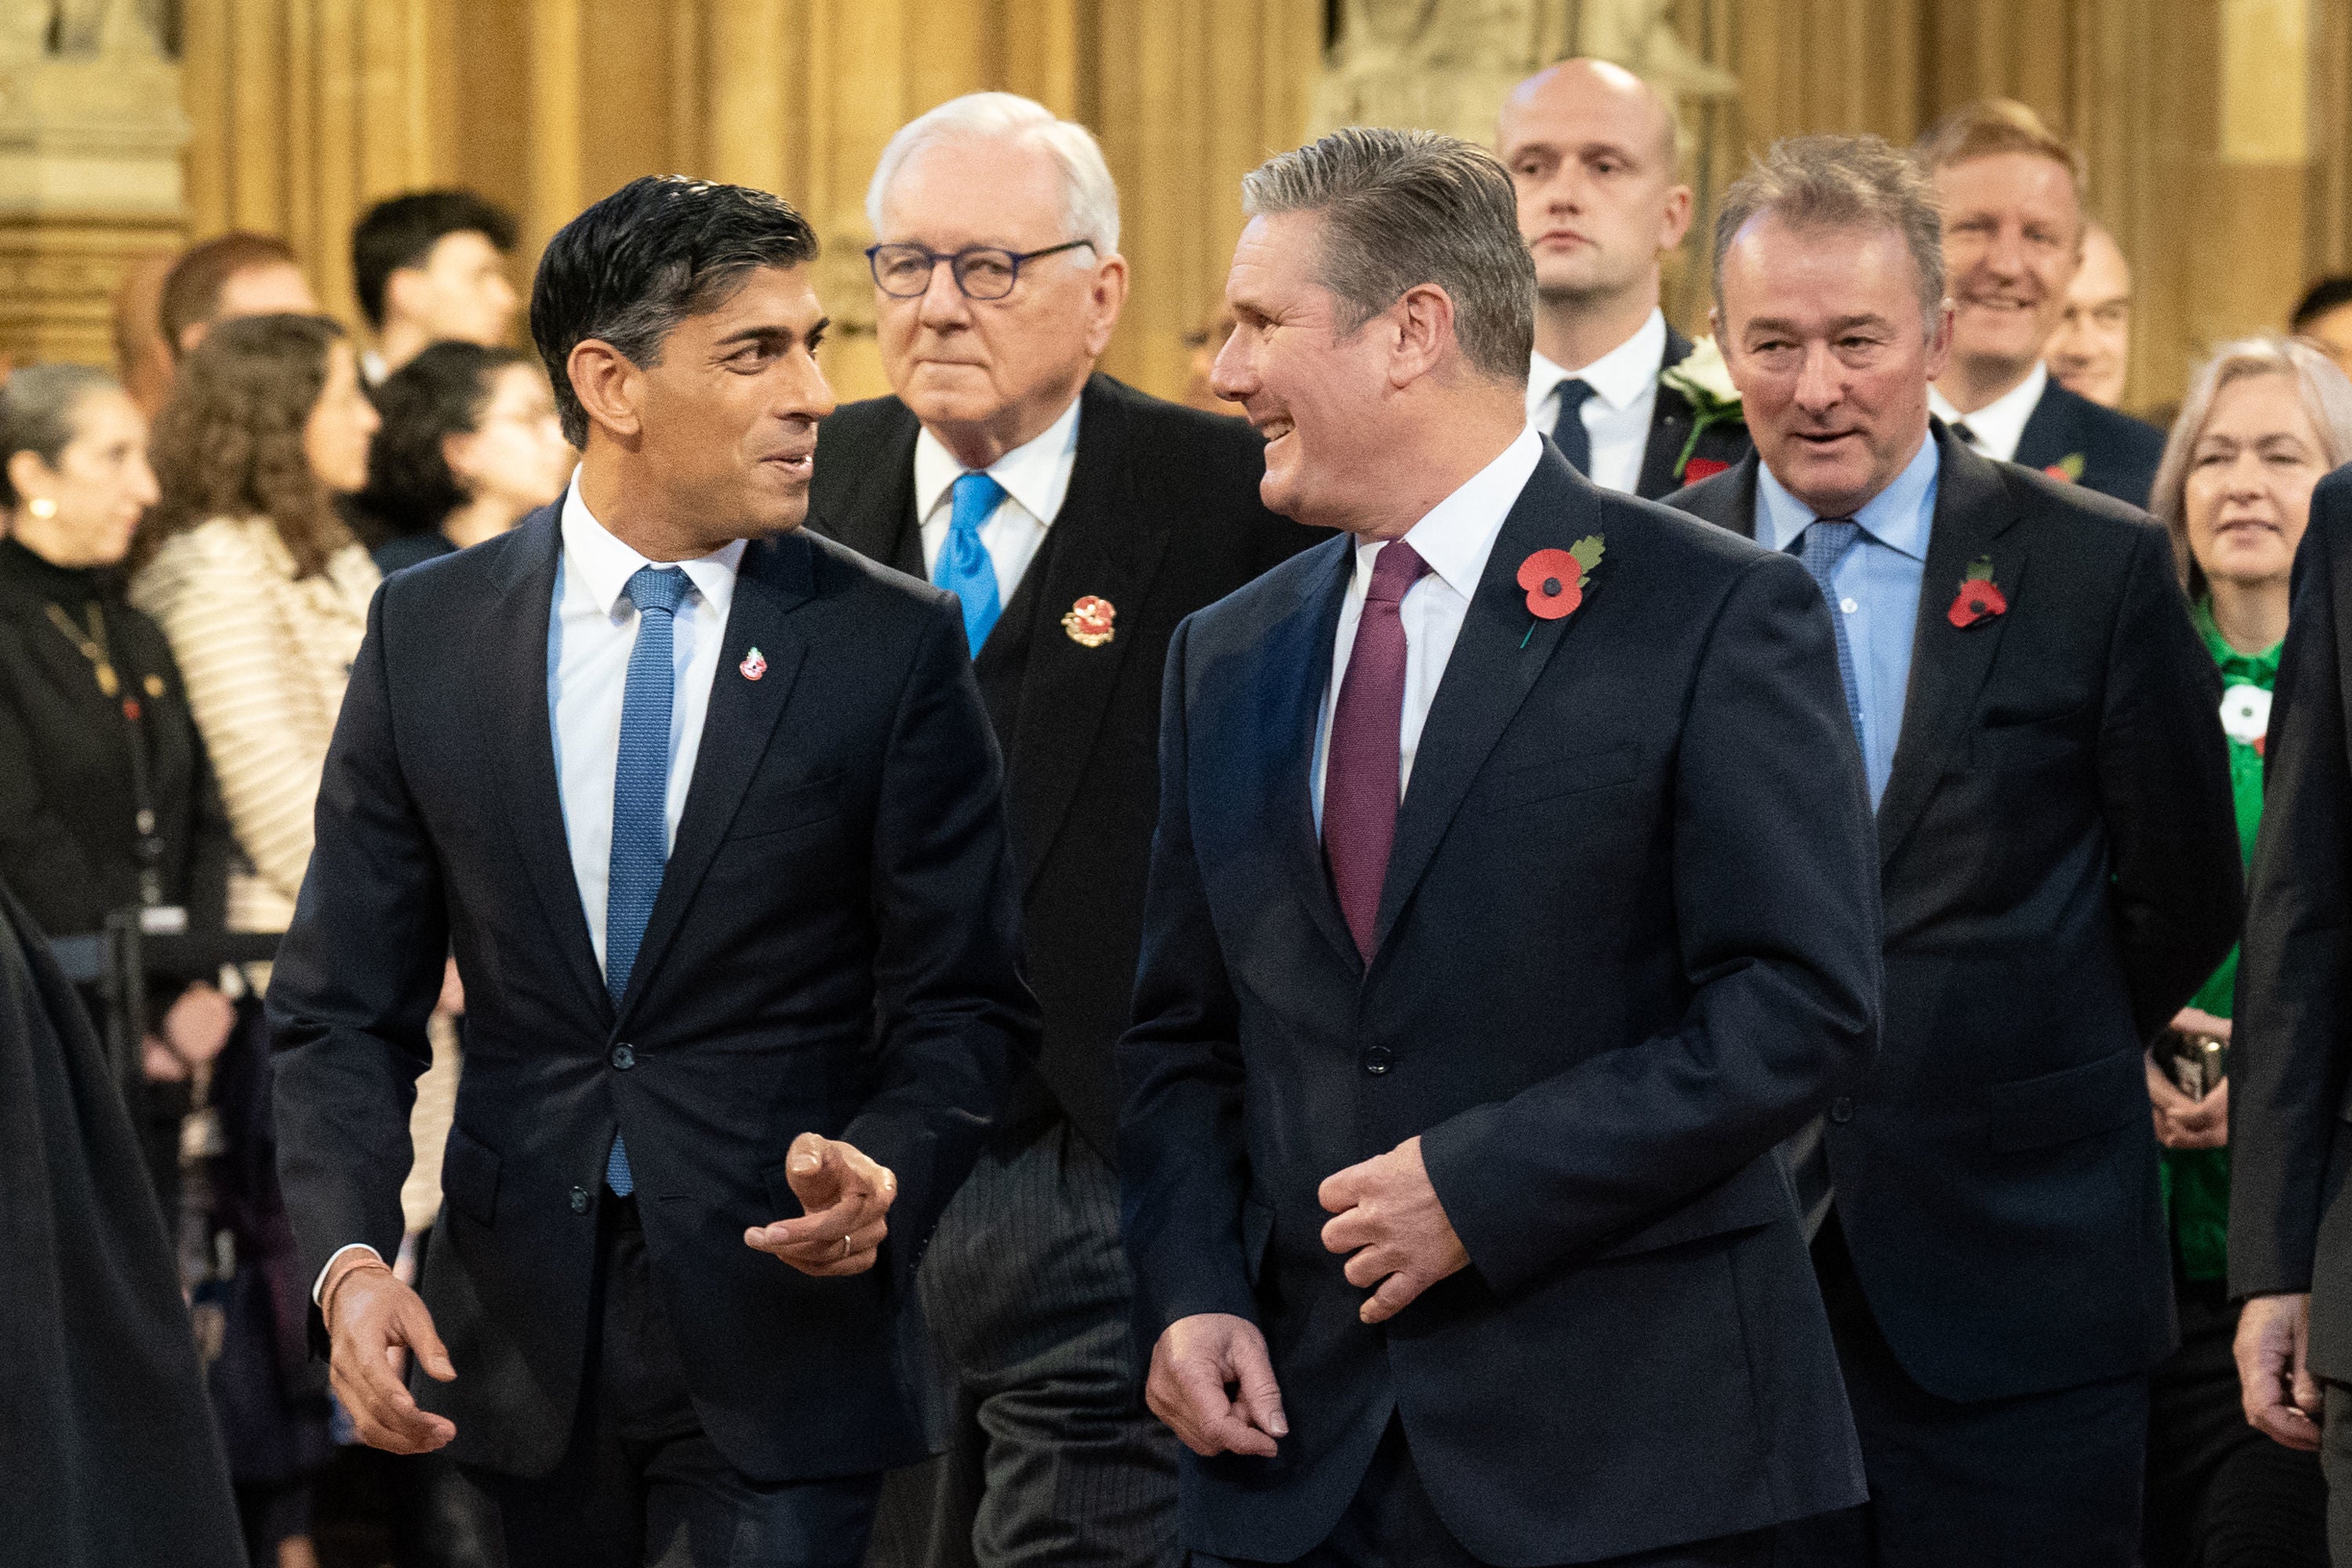 Rishi Sunak and Sir Keir Starmer walked together through the central lobby ahead of the State Opening of Parliament